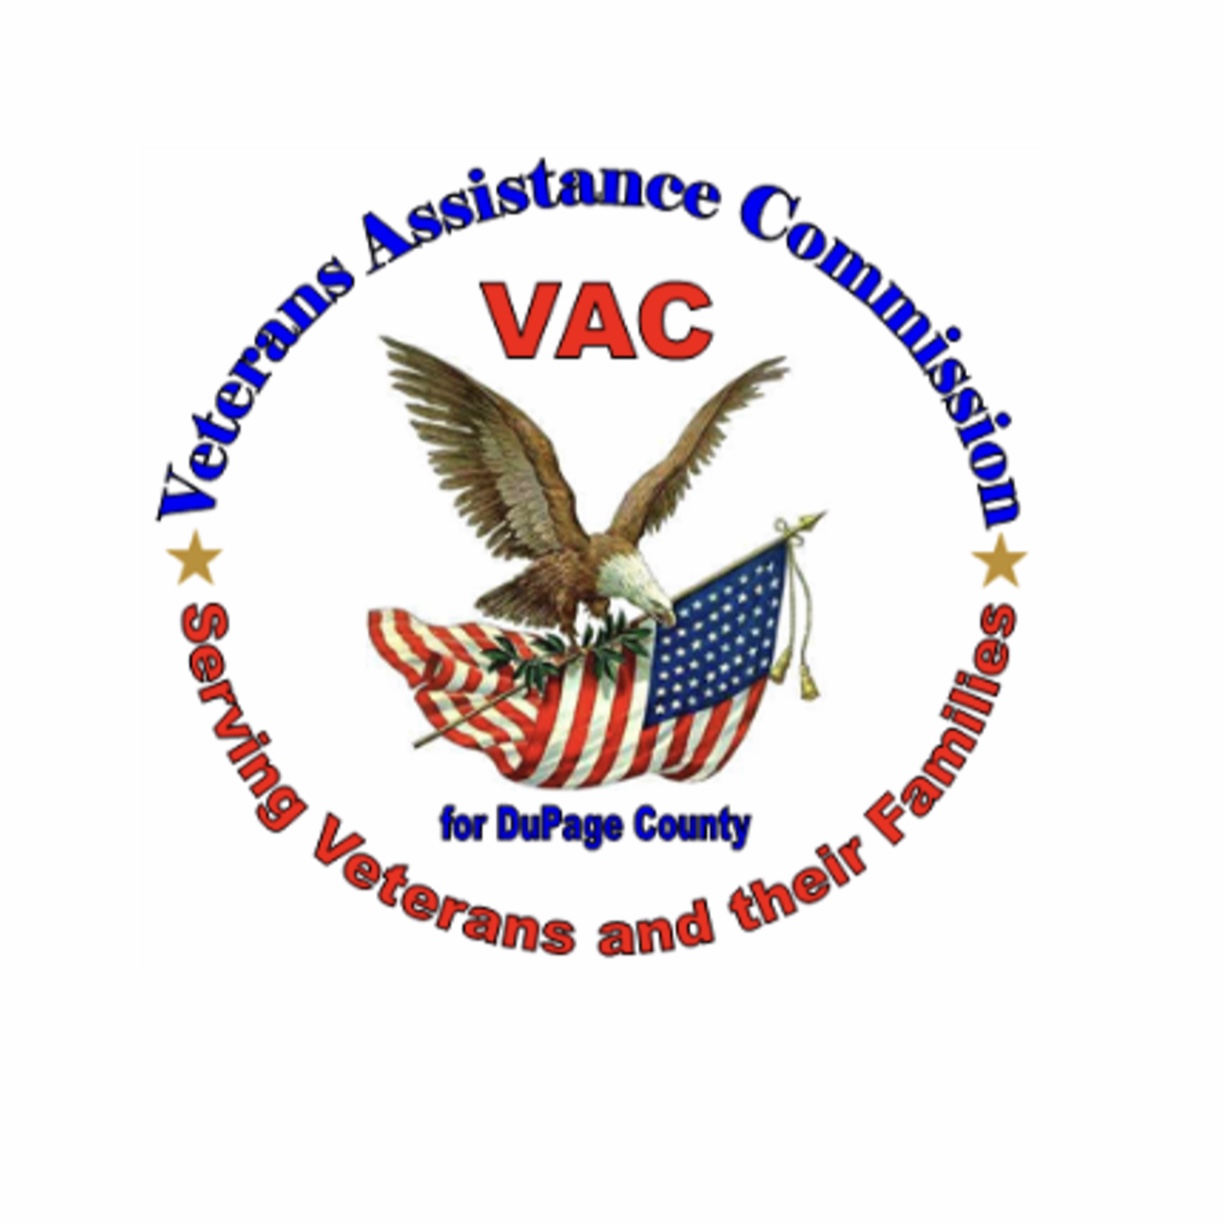 Veterans Assistance Commission of DuPage County